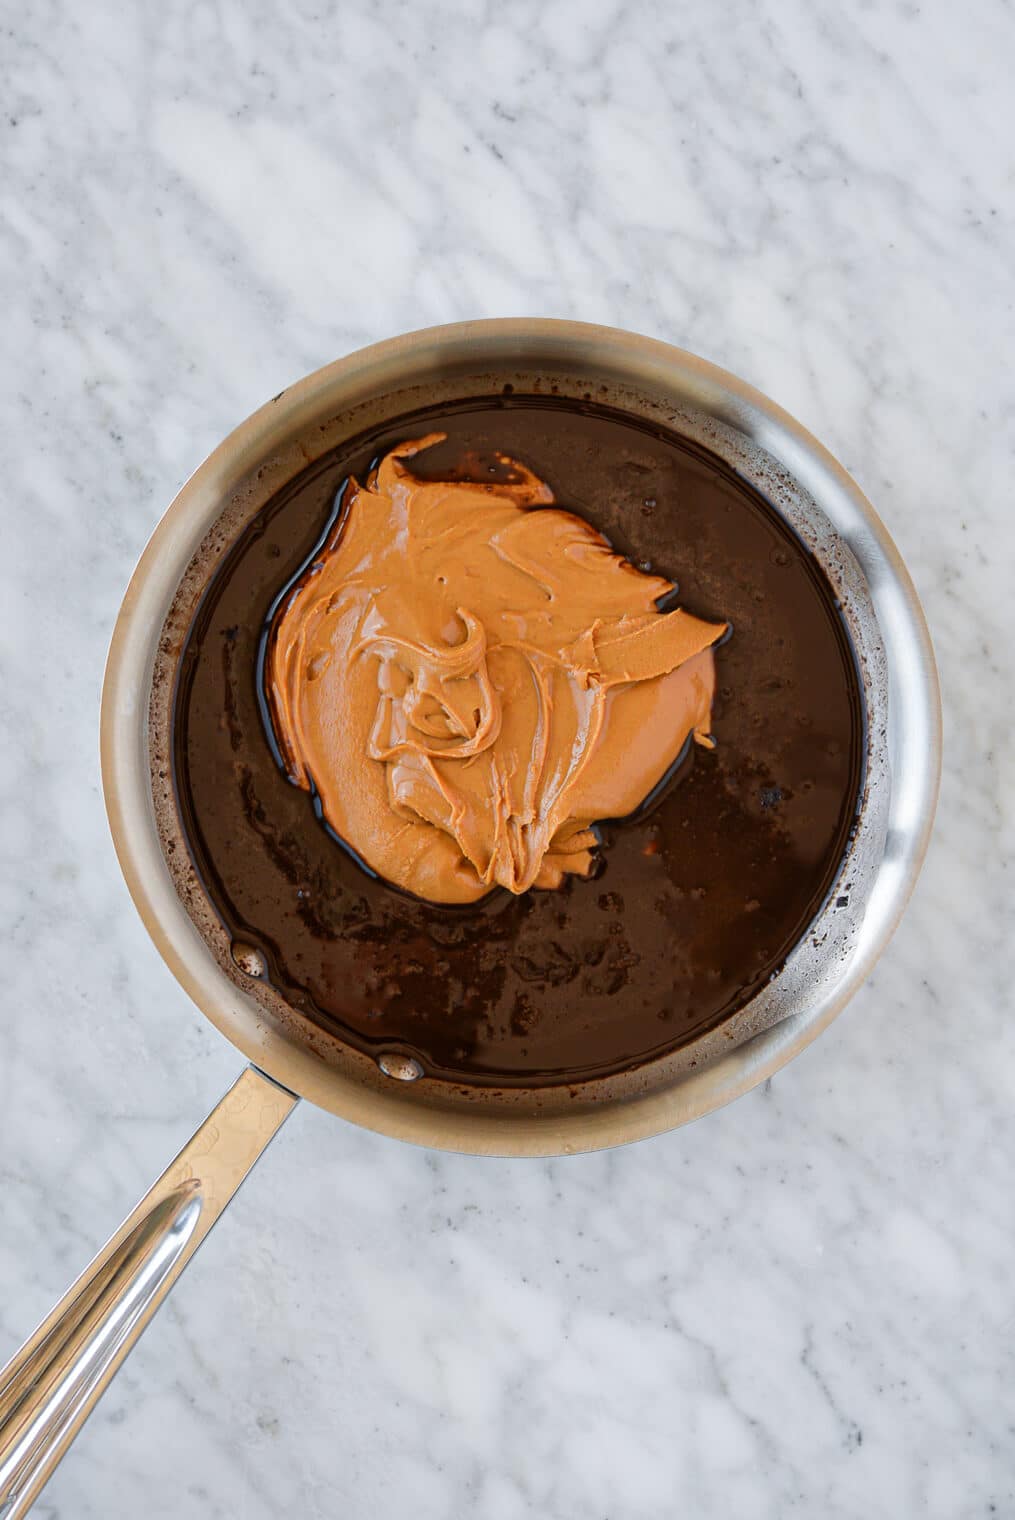 a stainless steel pan with a chocolate mixture with a dollop of peanut butter on top sitting on a marble surface